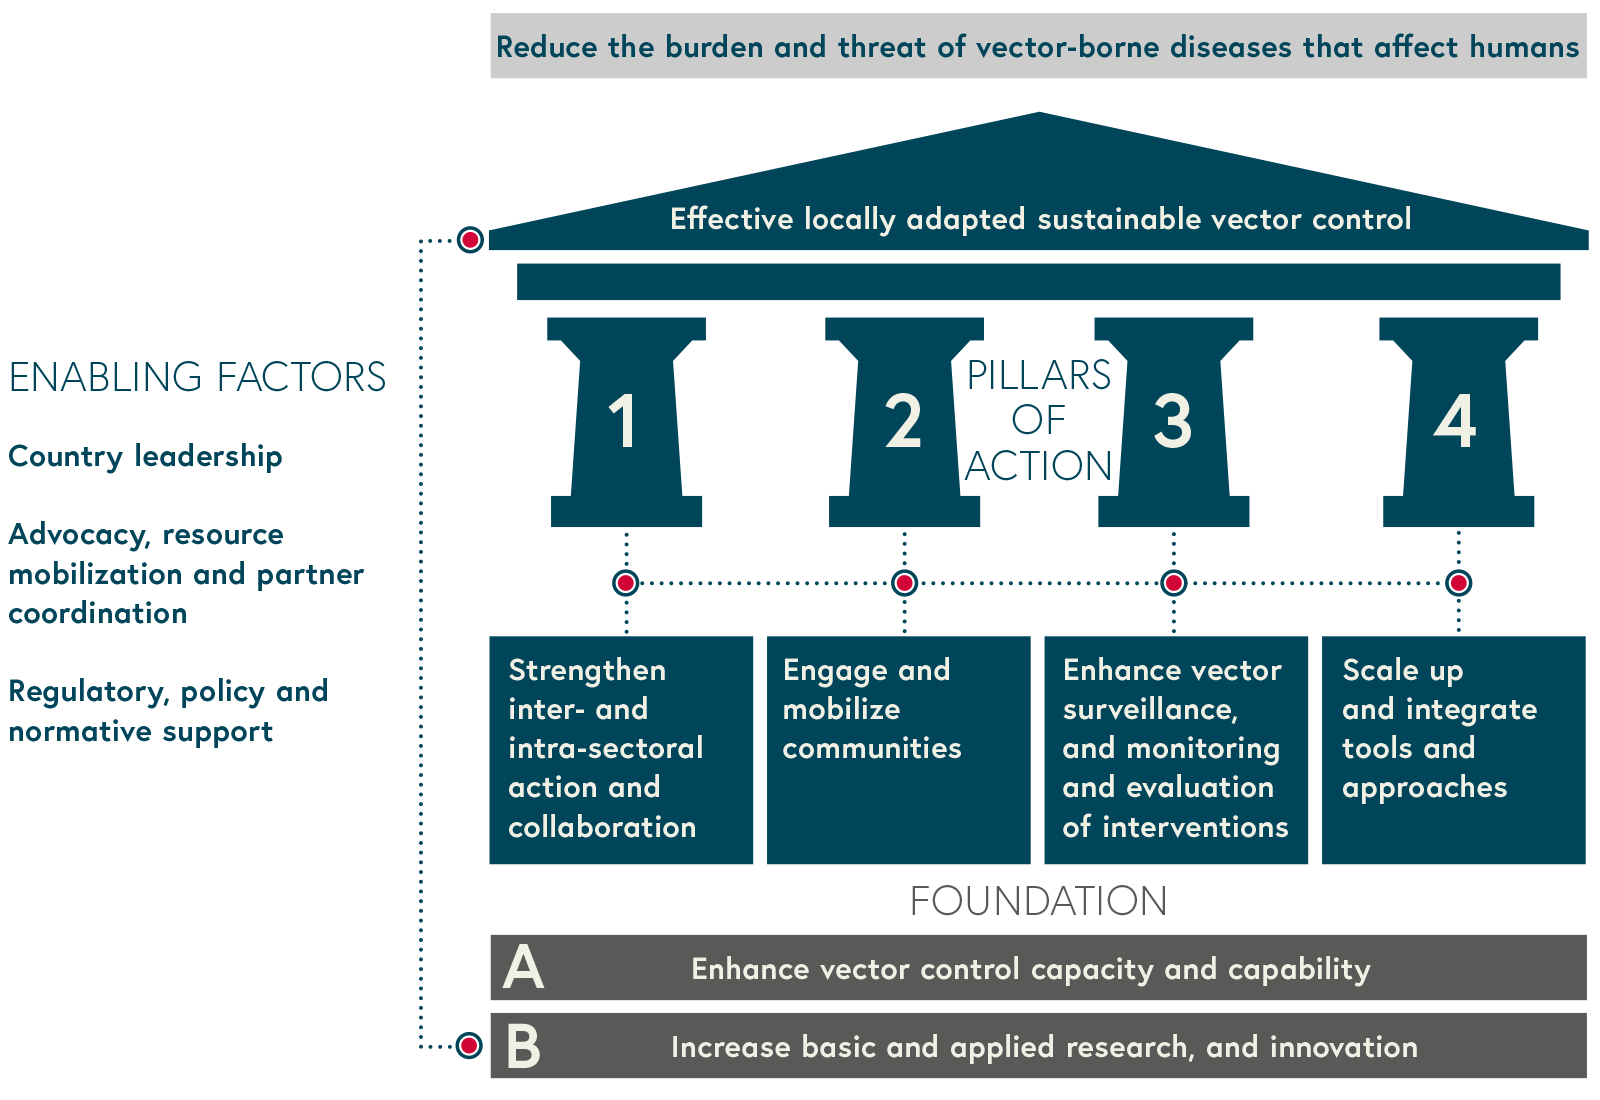 Reduce the burden and threat of vector-borne diseases that affect humans